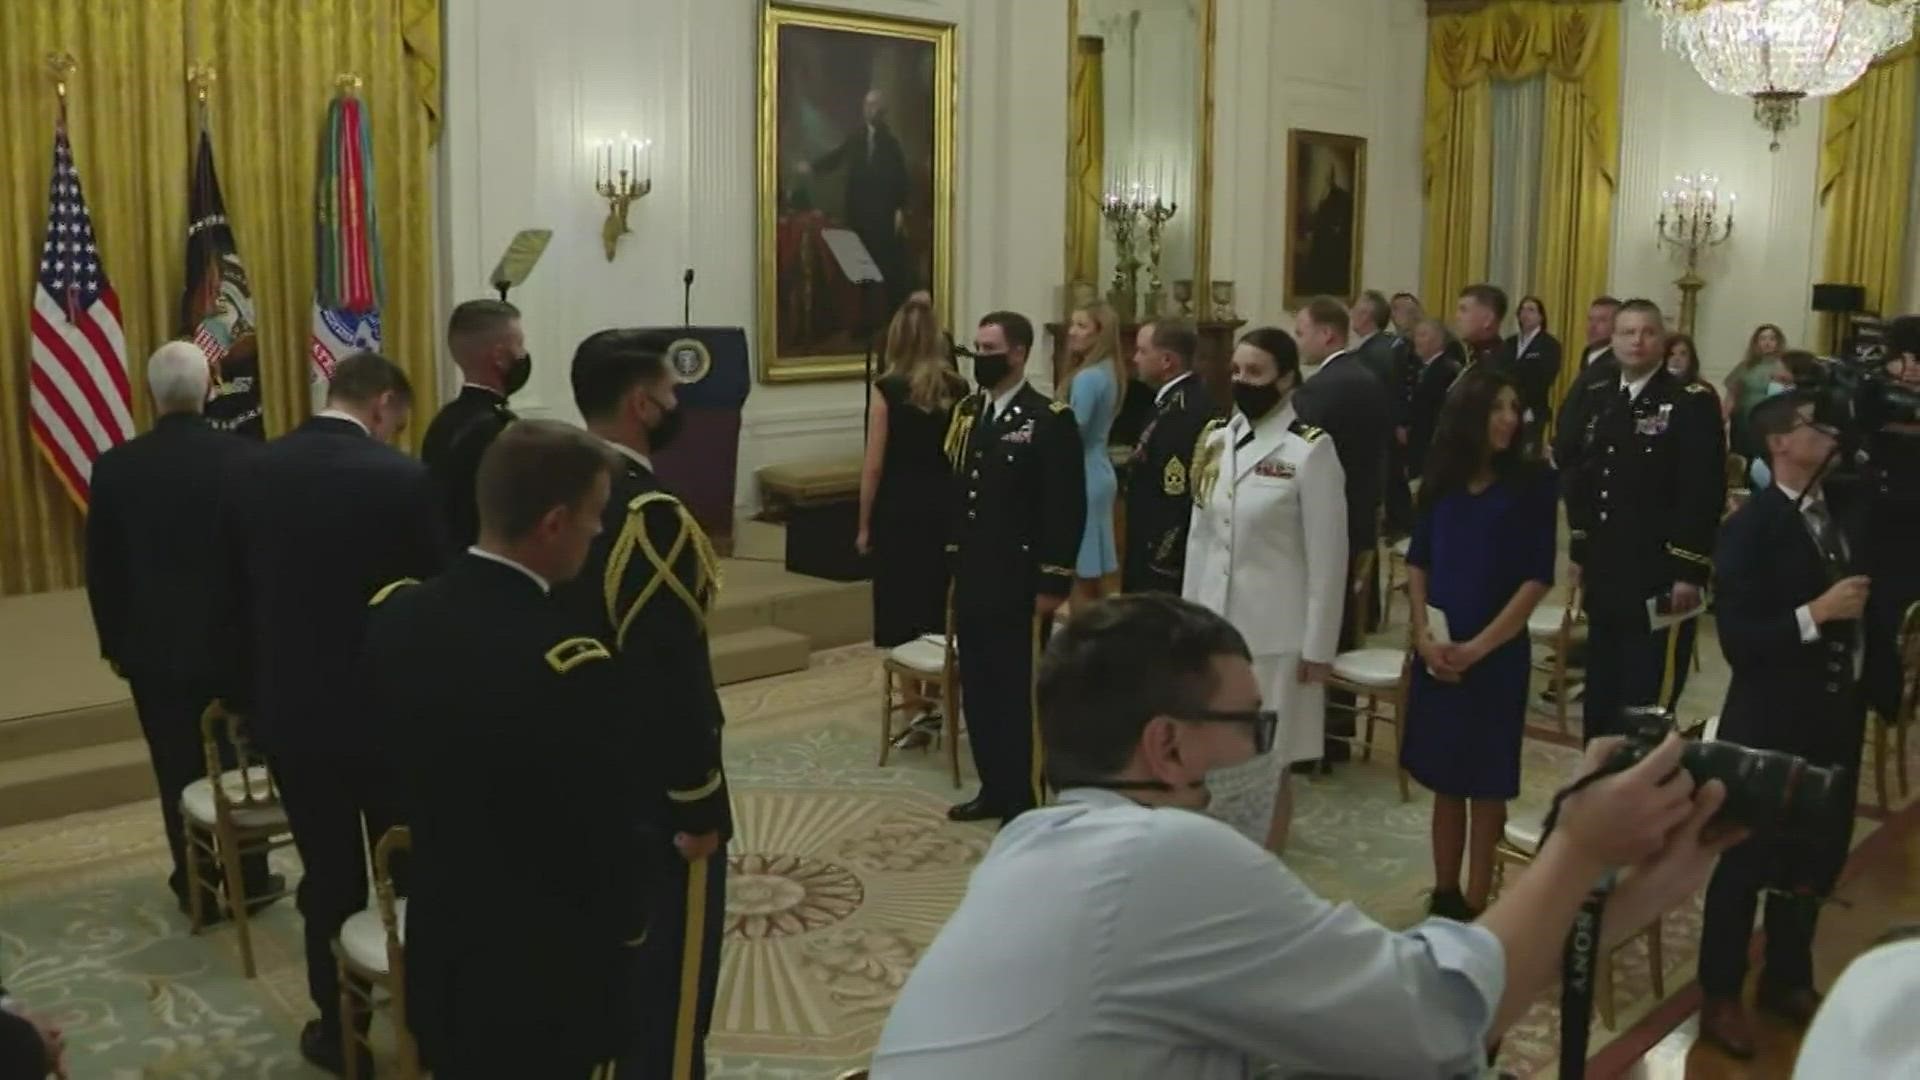 President Donald Trump gave Sgt. Major Thomas Payne the Medal of Honor at a White House ceremony on September 11.